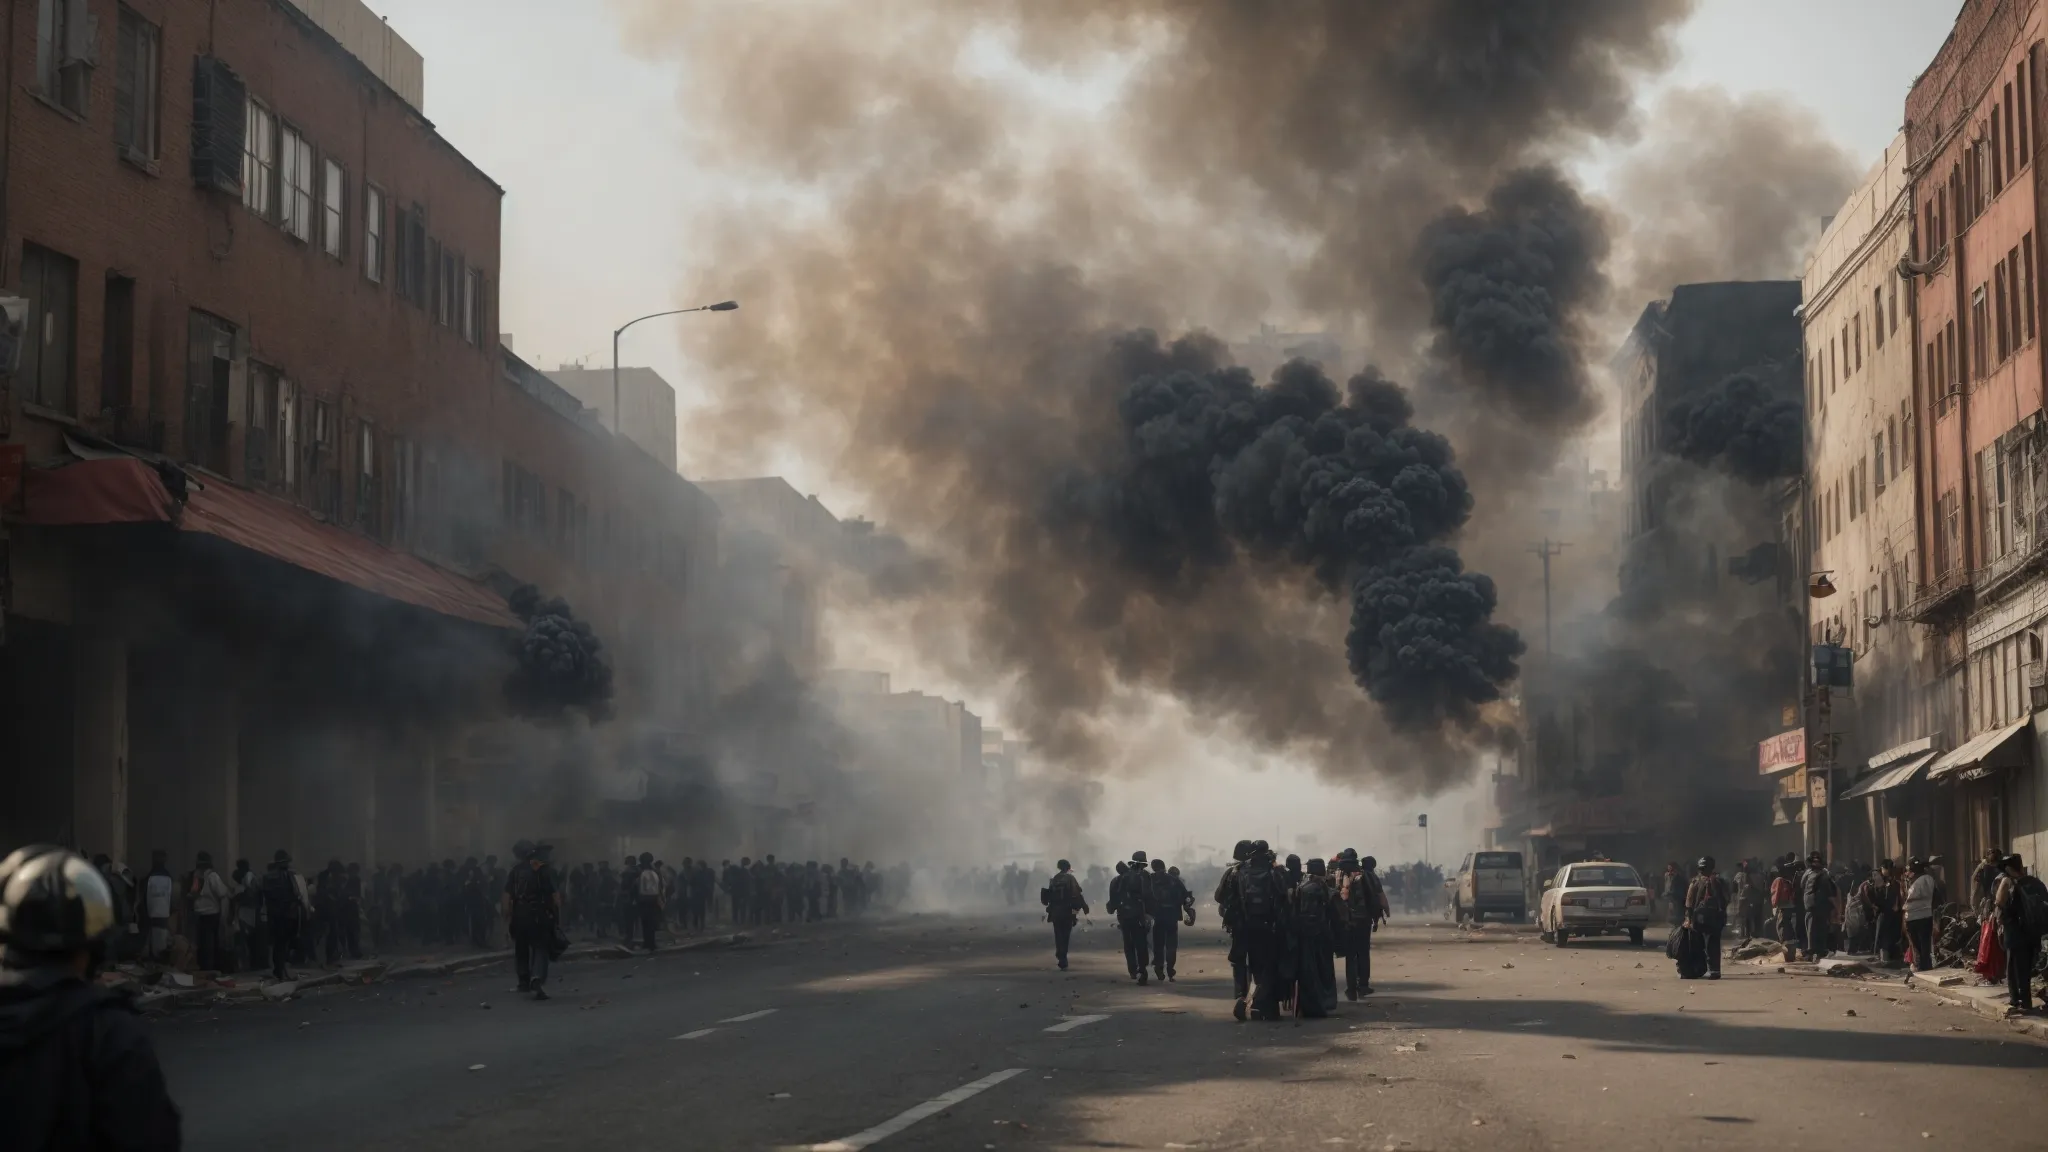 smoke plumes rise over a city as civilians flee amidst the chaos of civil unrest.